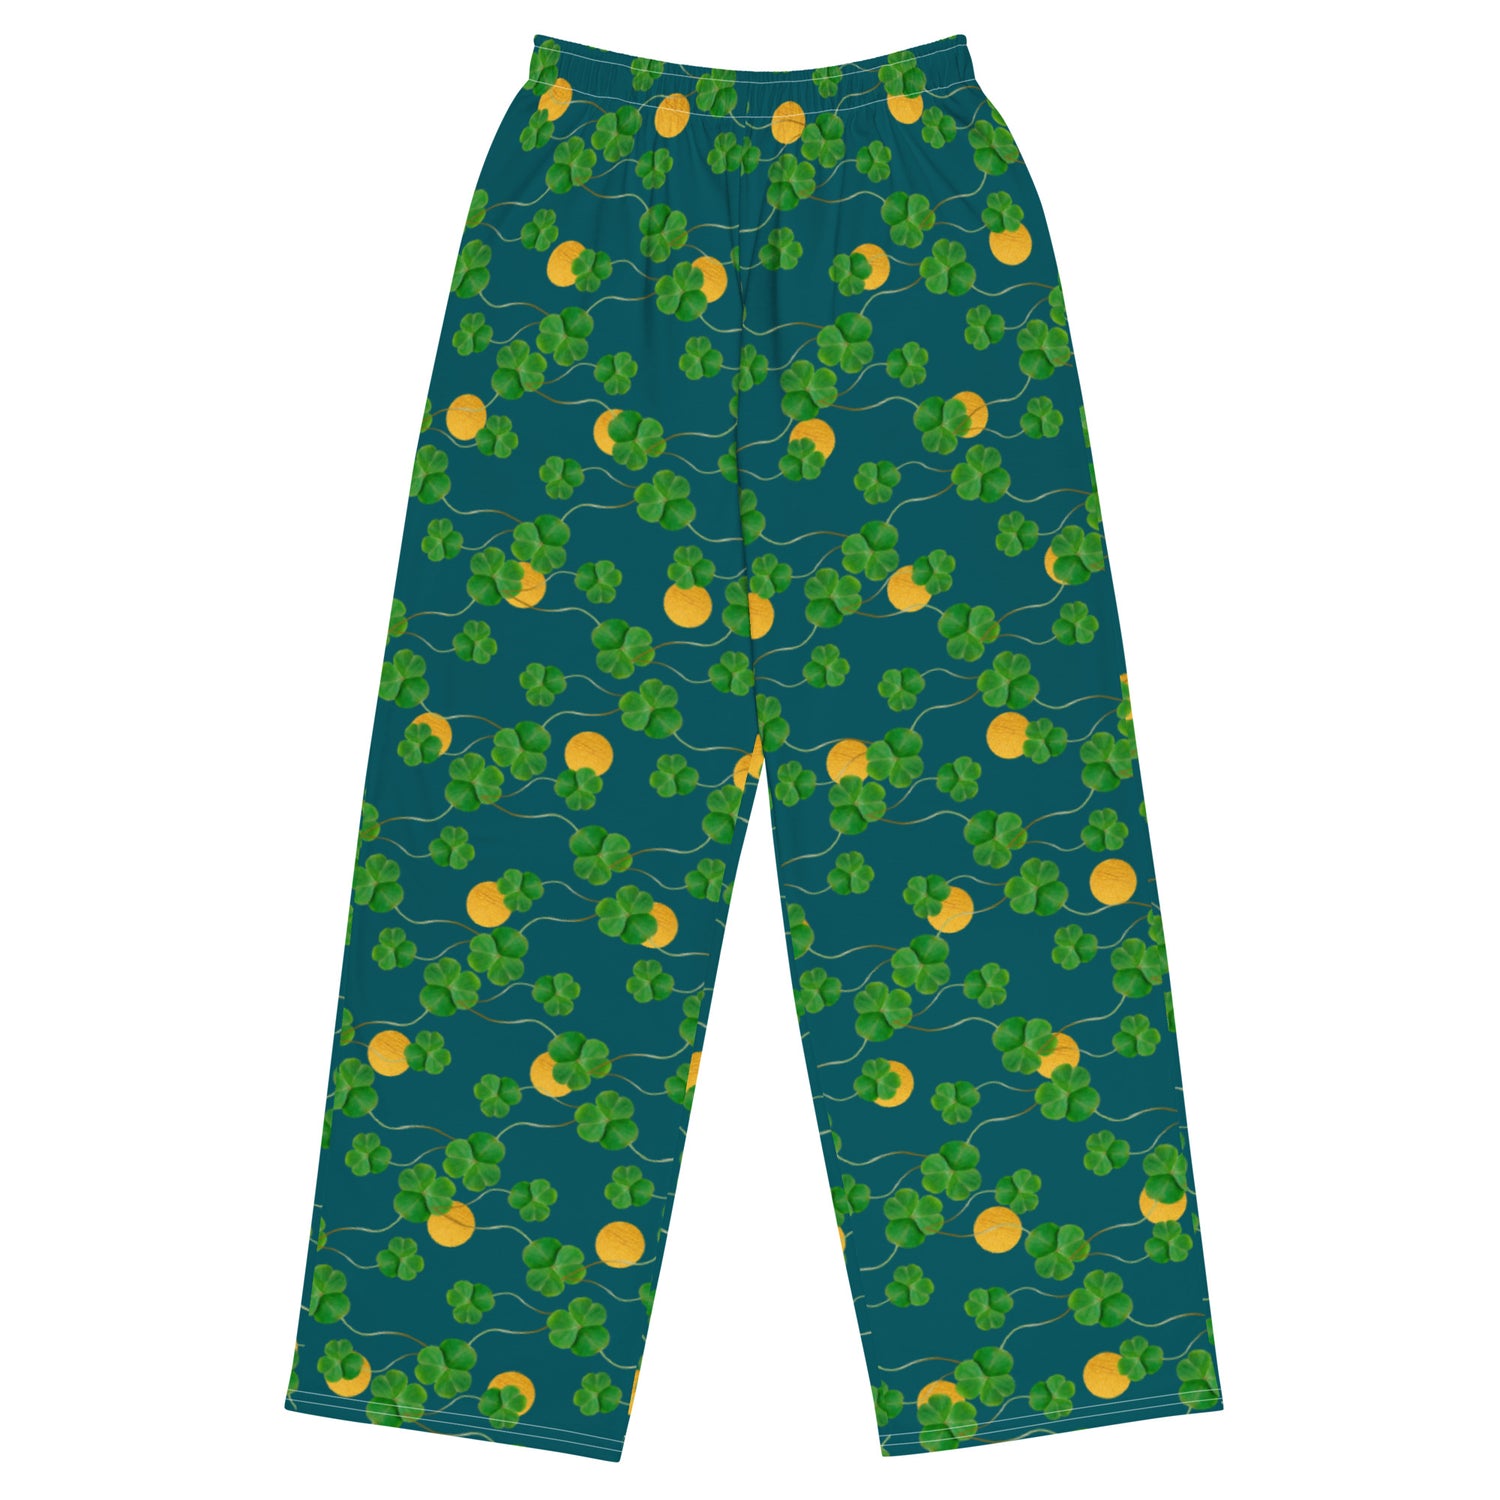 Unisex wide leg pants with side pockets, elastic waistband and drawstring.  Design features pattern of three-leaf clover and lucky gold coins on a blue-green background. 